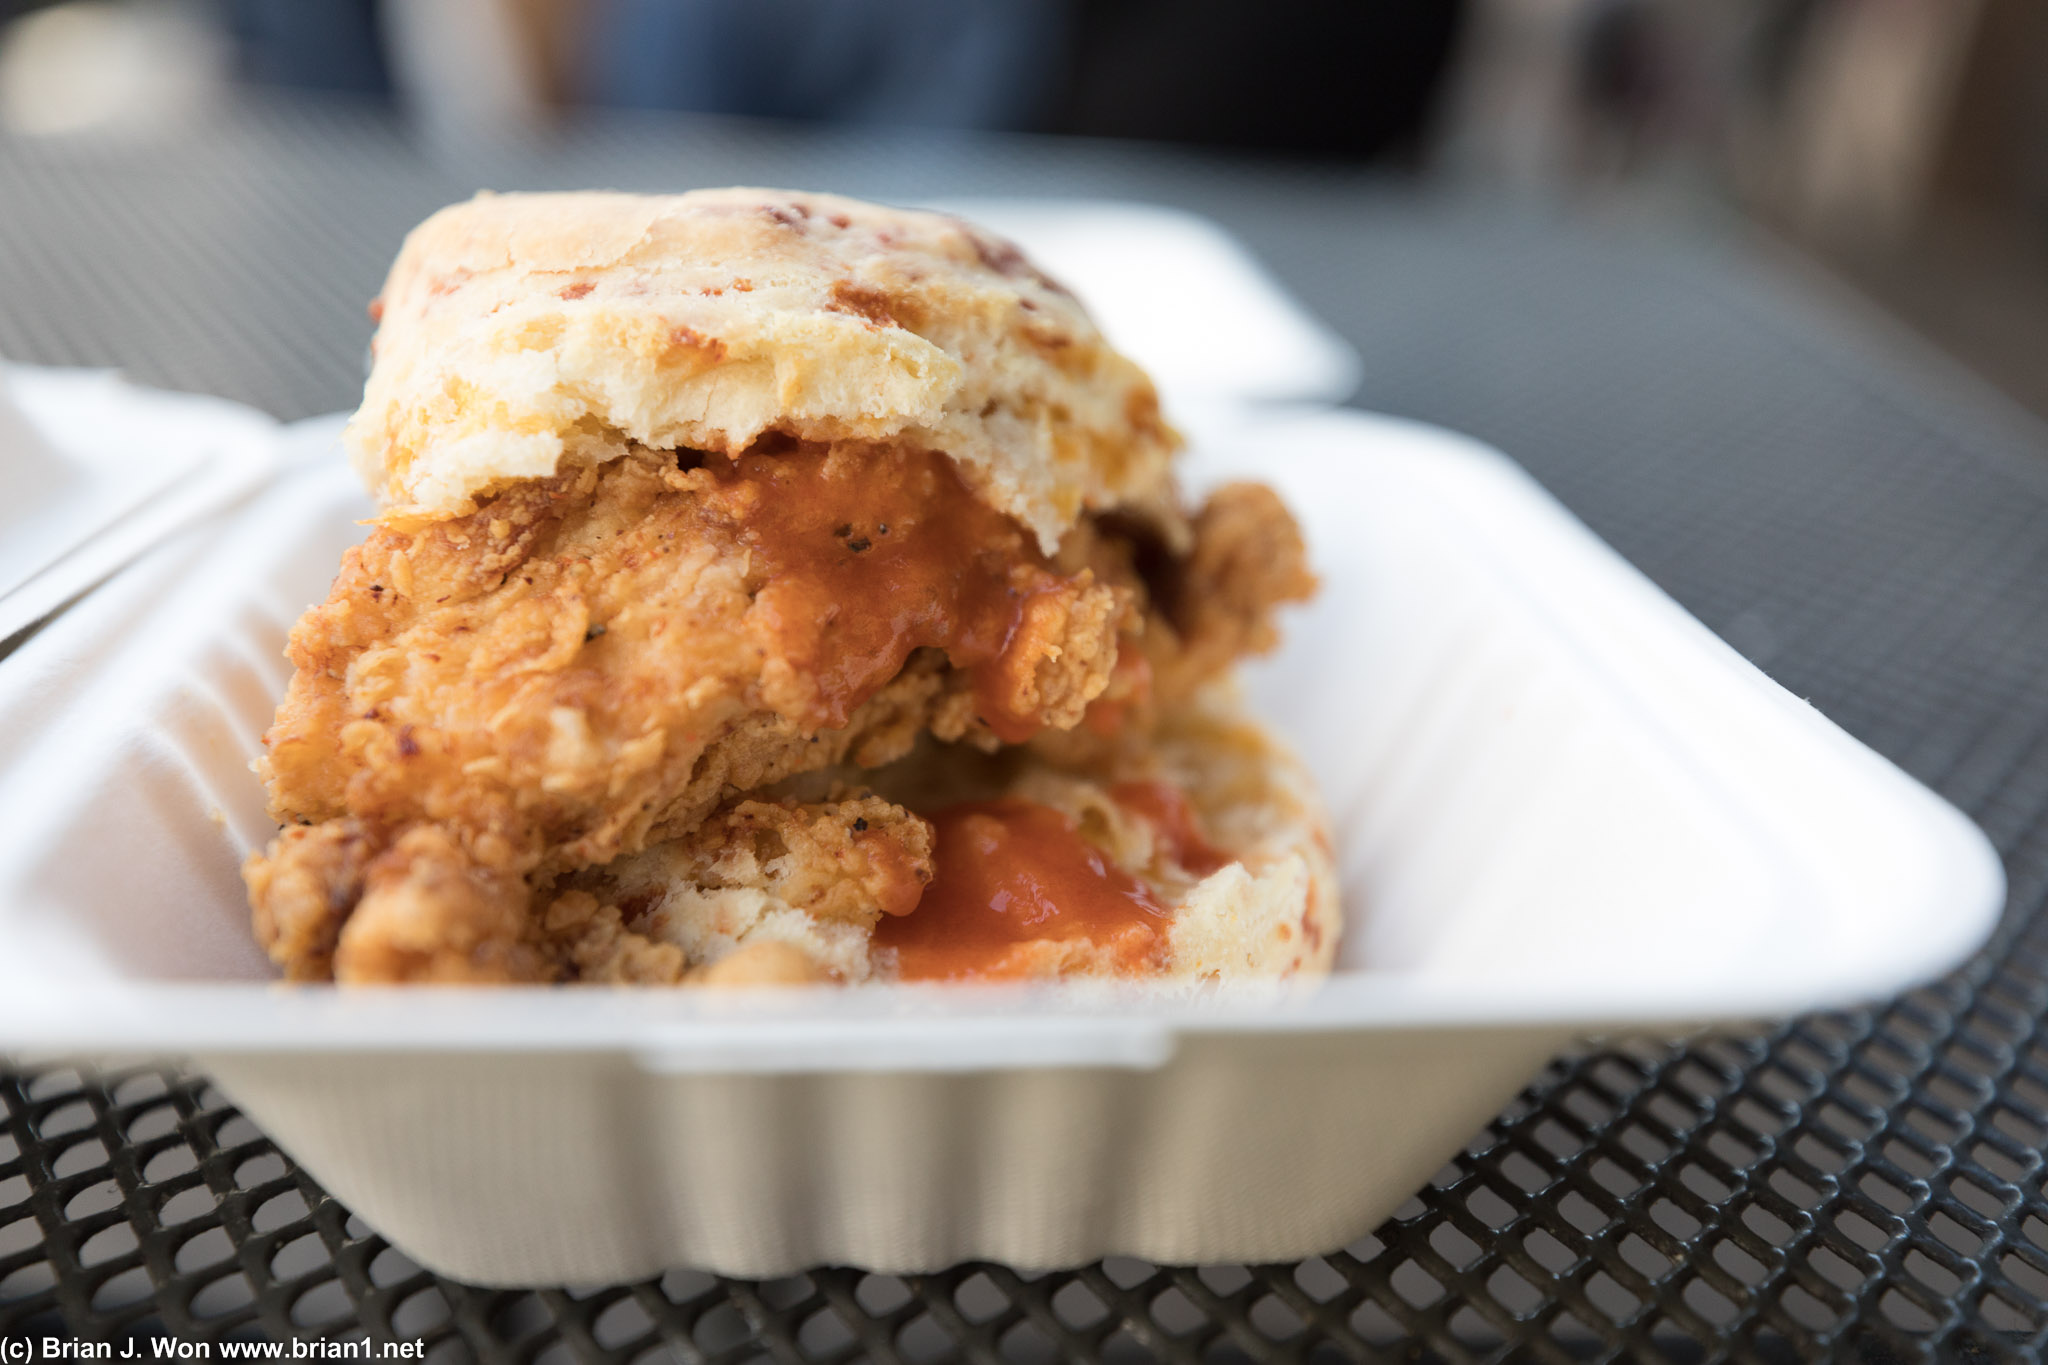 Fried chicken sandwich on a biscuit. Biscuit is more buttery than I remembered.